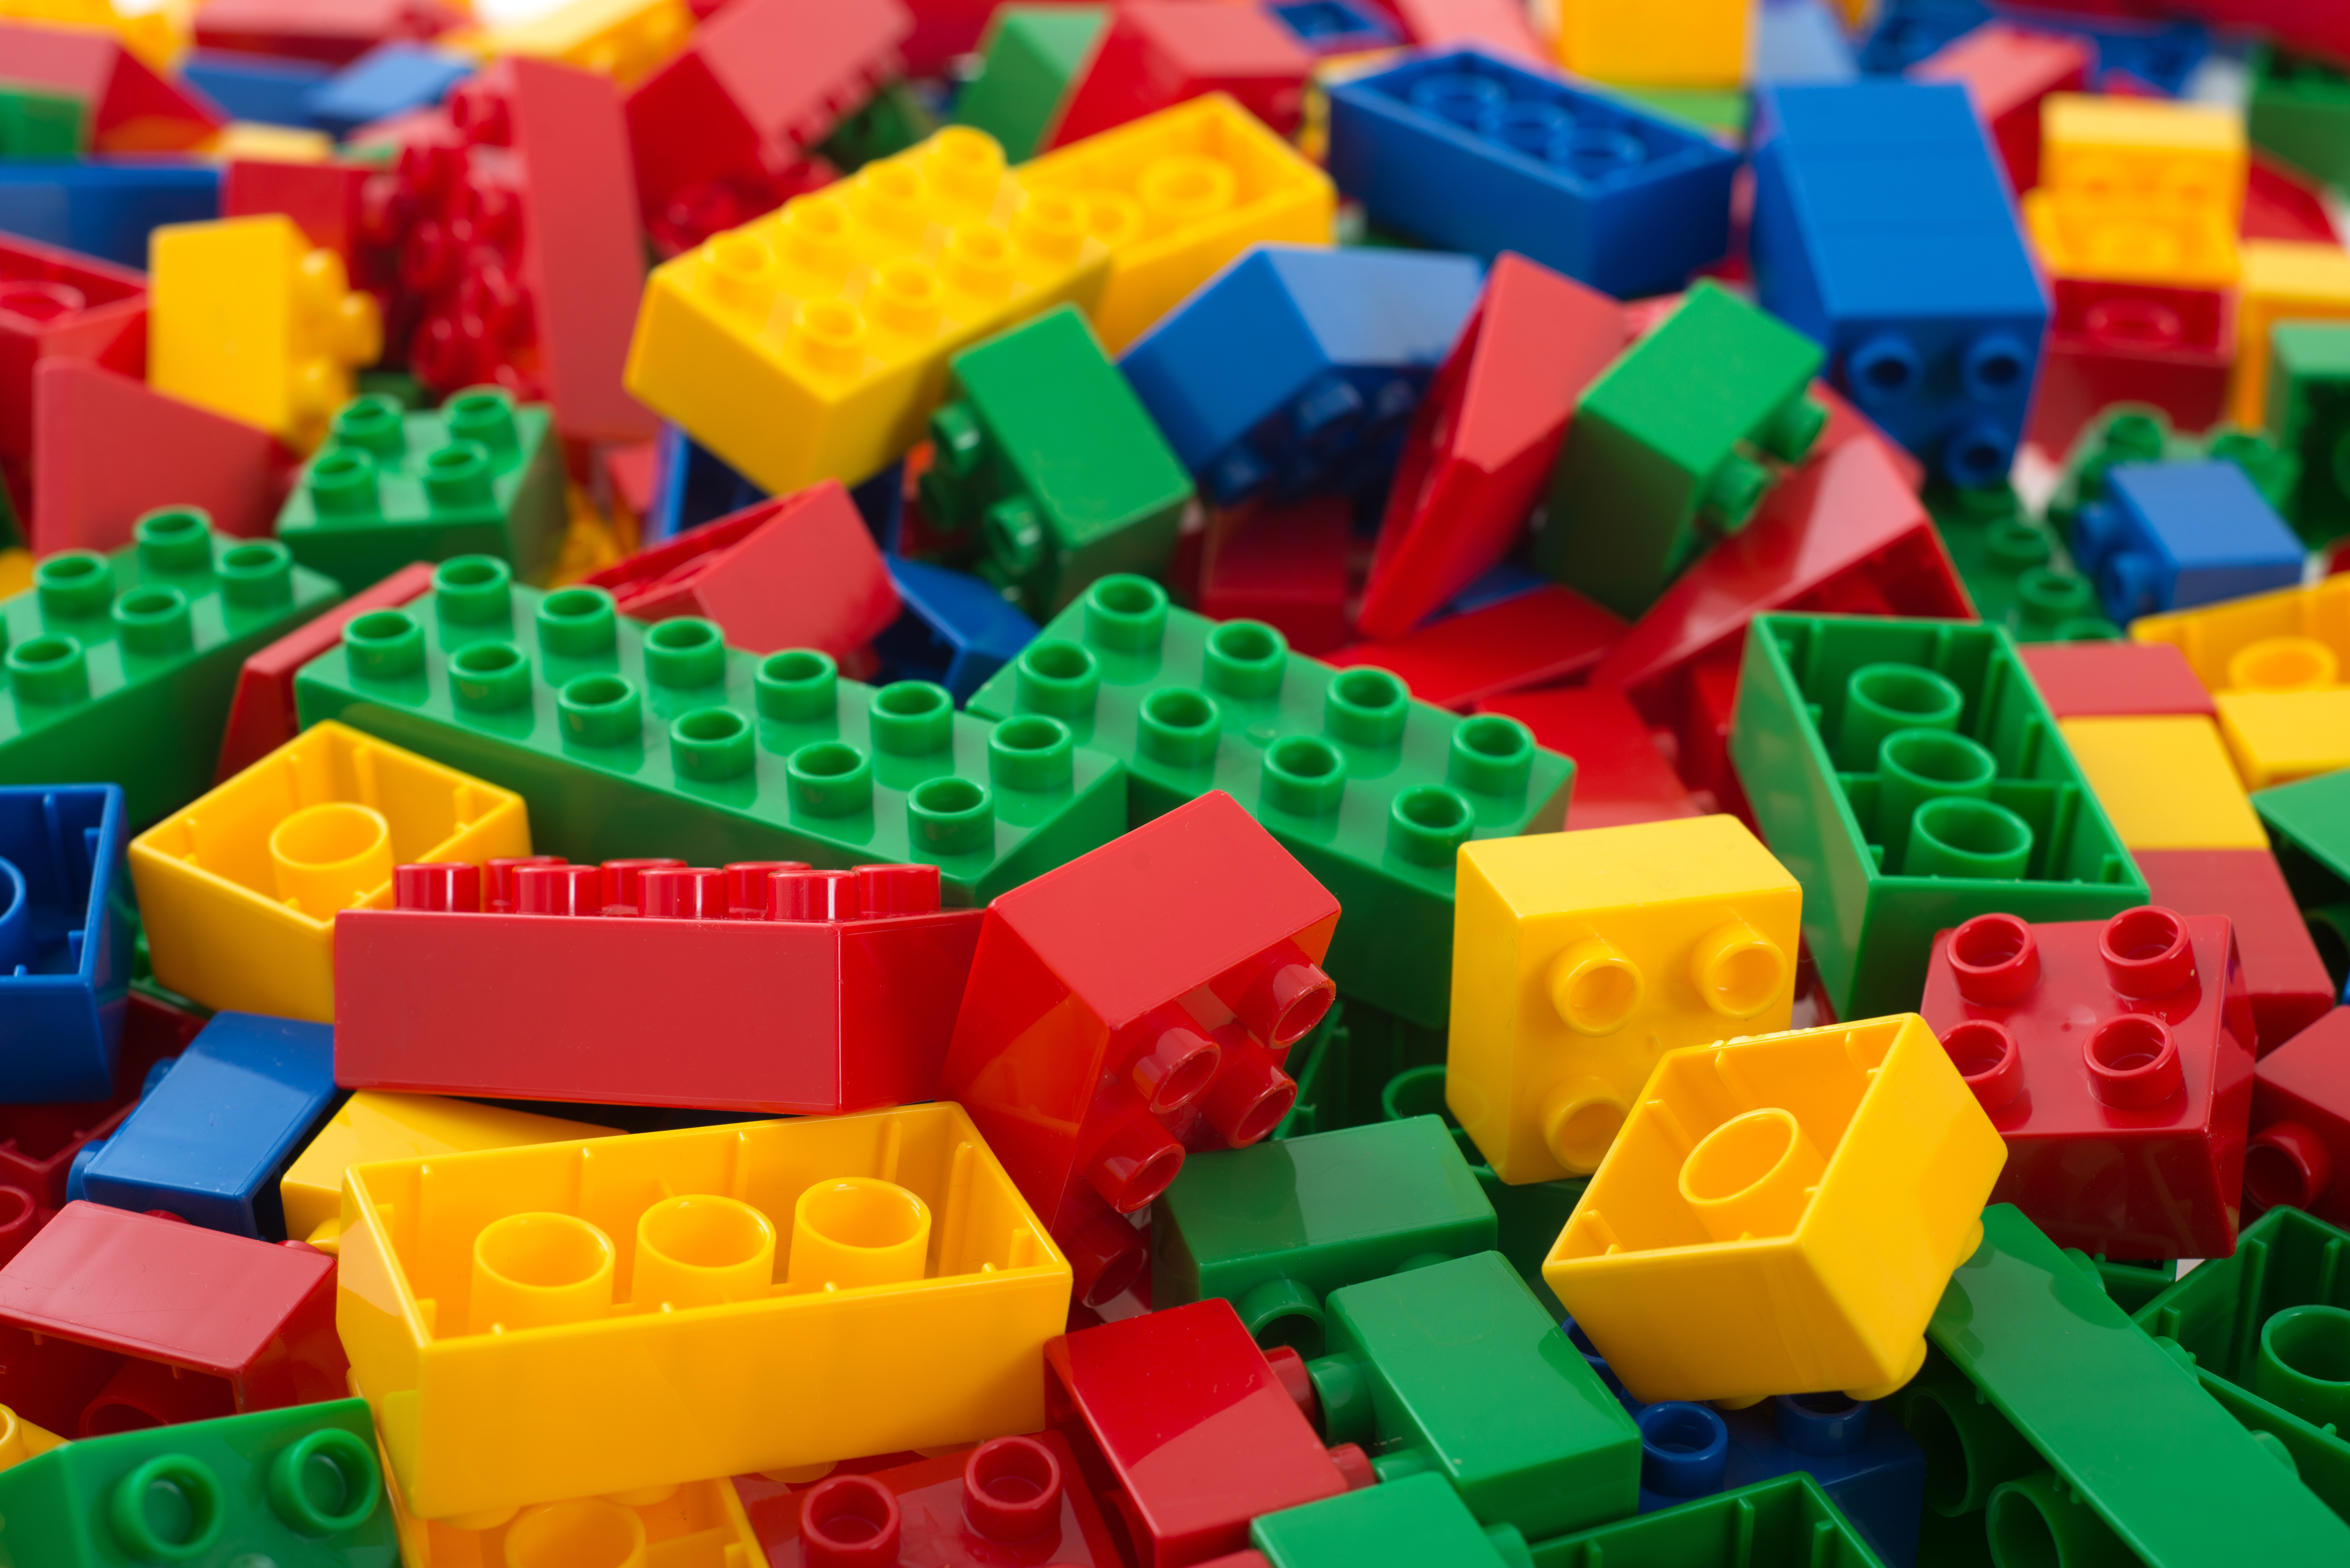 Dream Job Alert: LEGO Is Hiring Someone To Play With LEGOs All Day